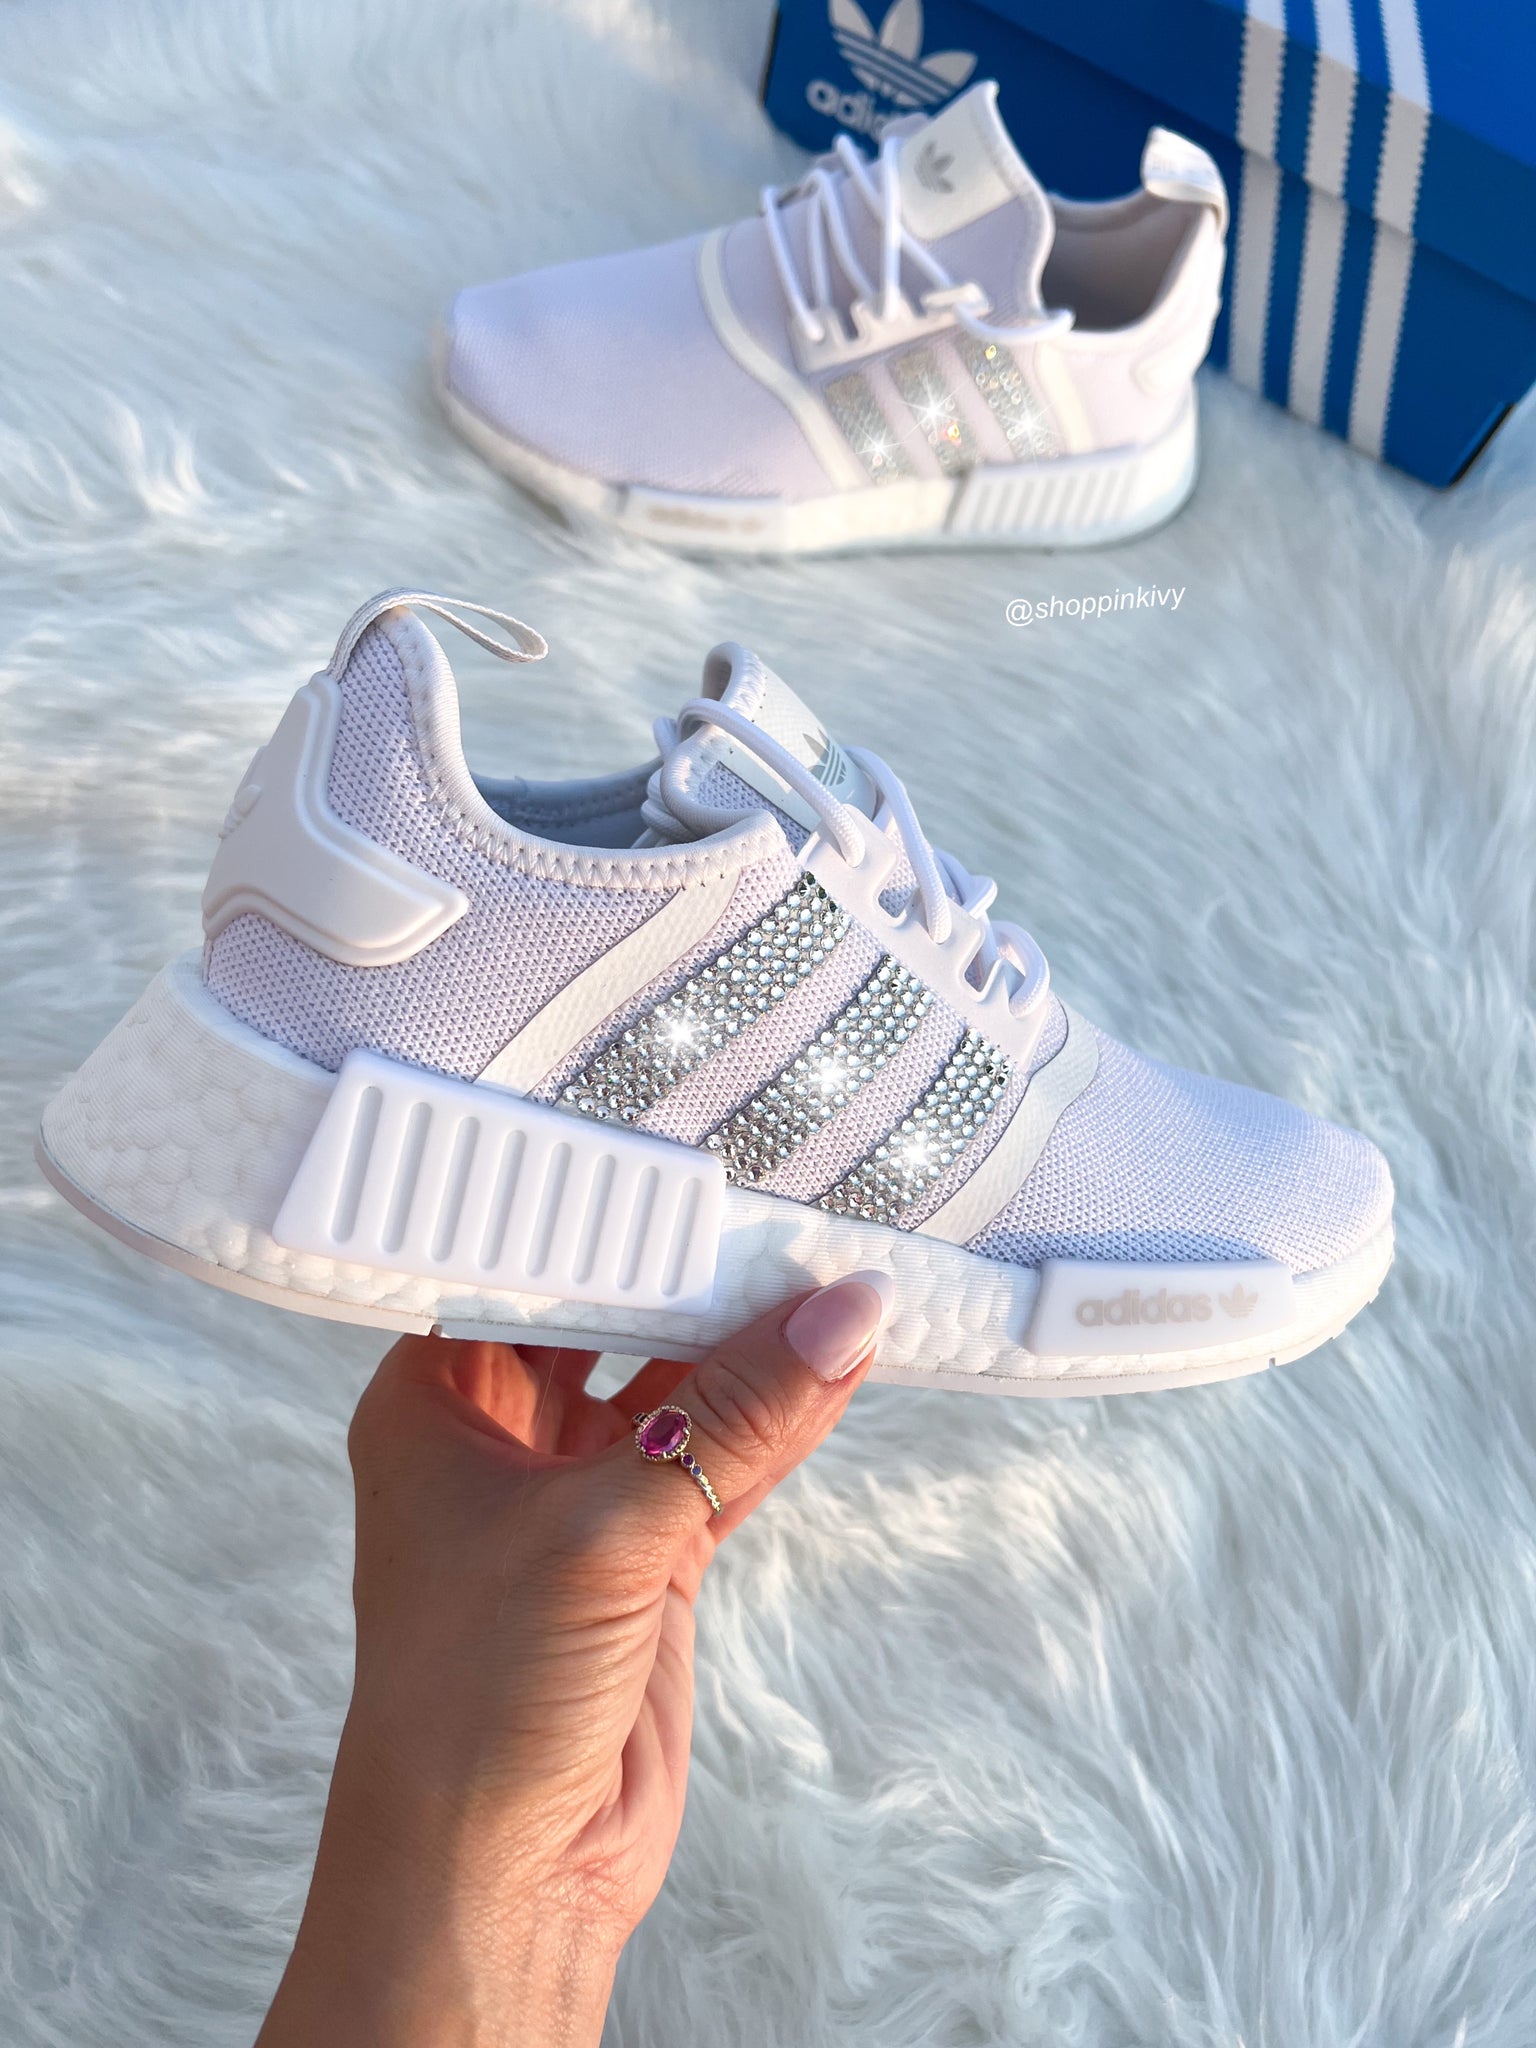 adidas NMD_R1 Shoes - White